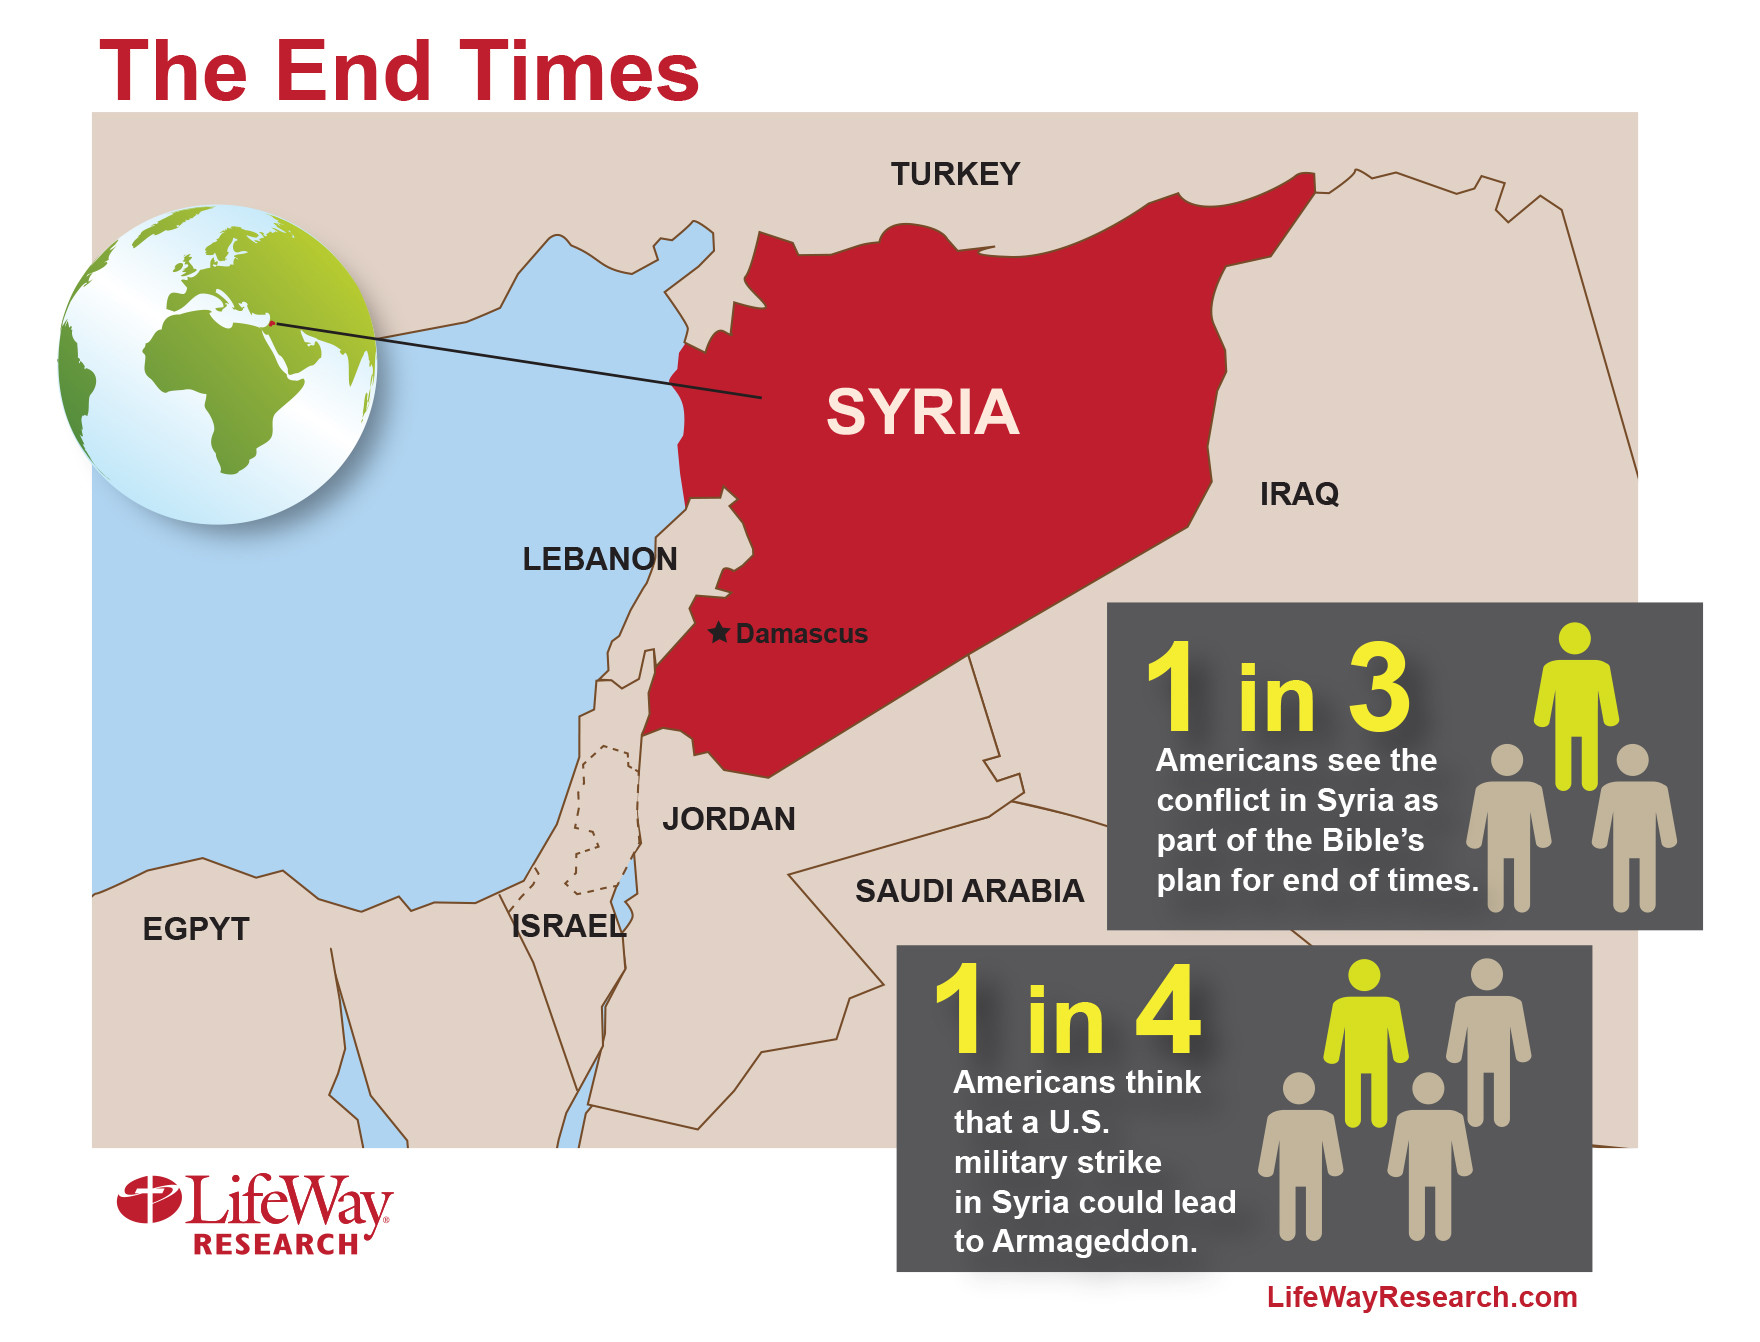 32% of Americans Think the Syrian Crisis is Part of ‘End Times’